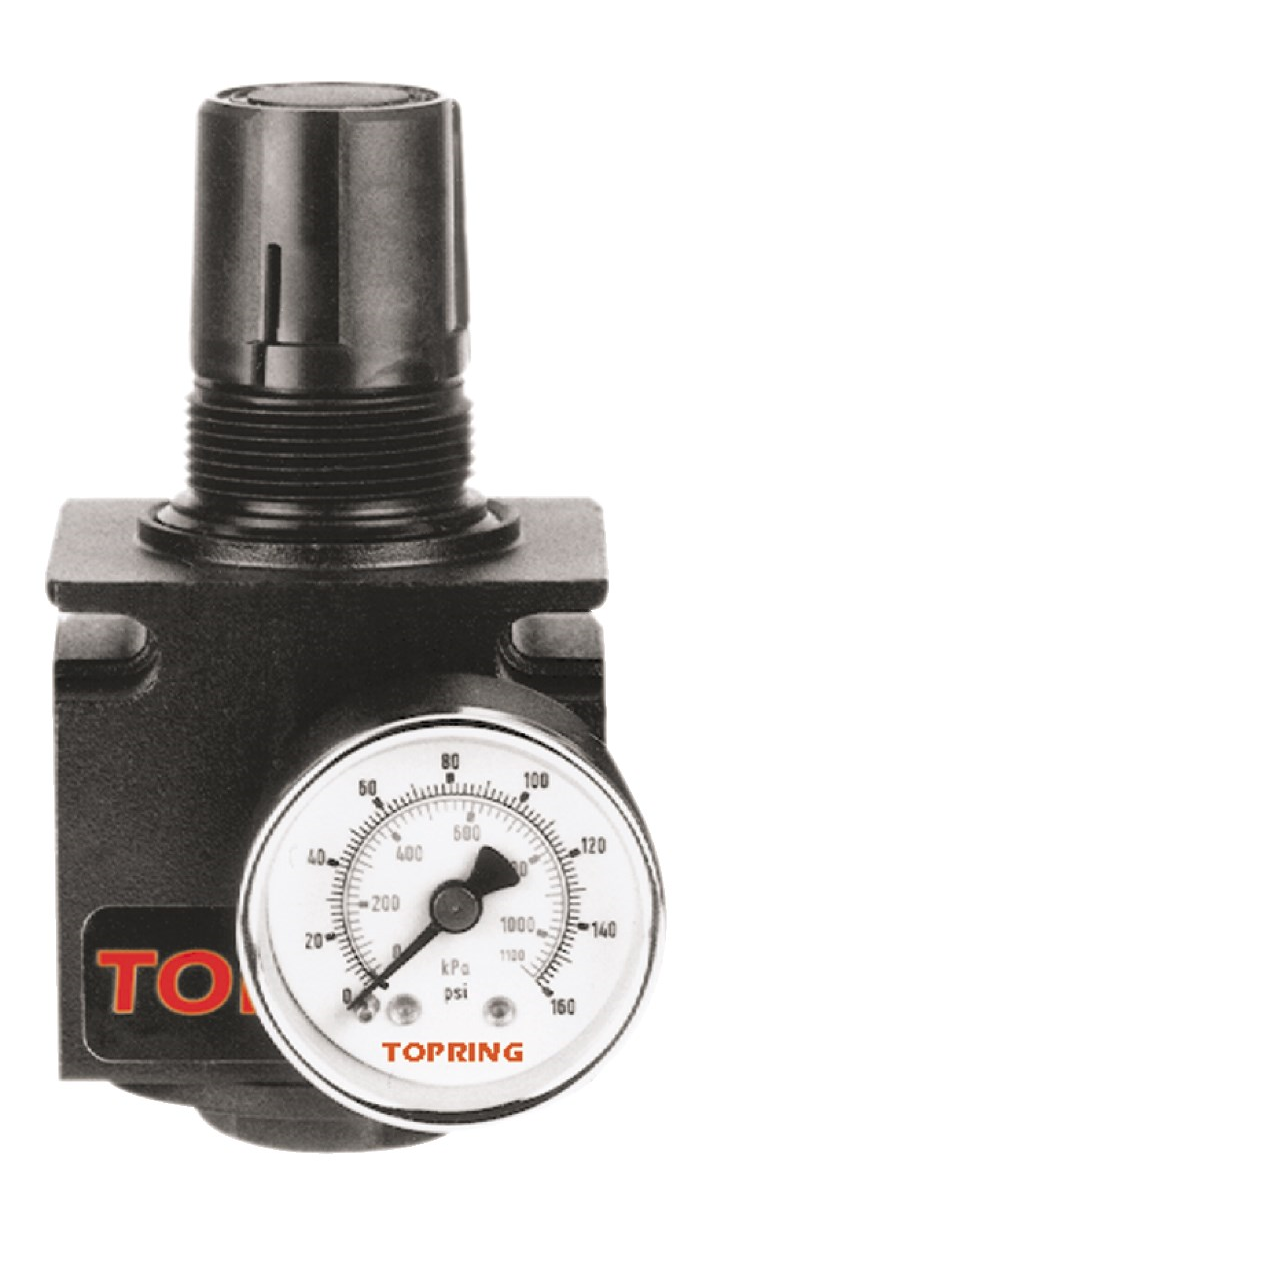 TOPRING Airflo 400 1//2 Air Compressor Regulator with Gauge and mounting Bracket